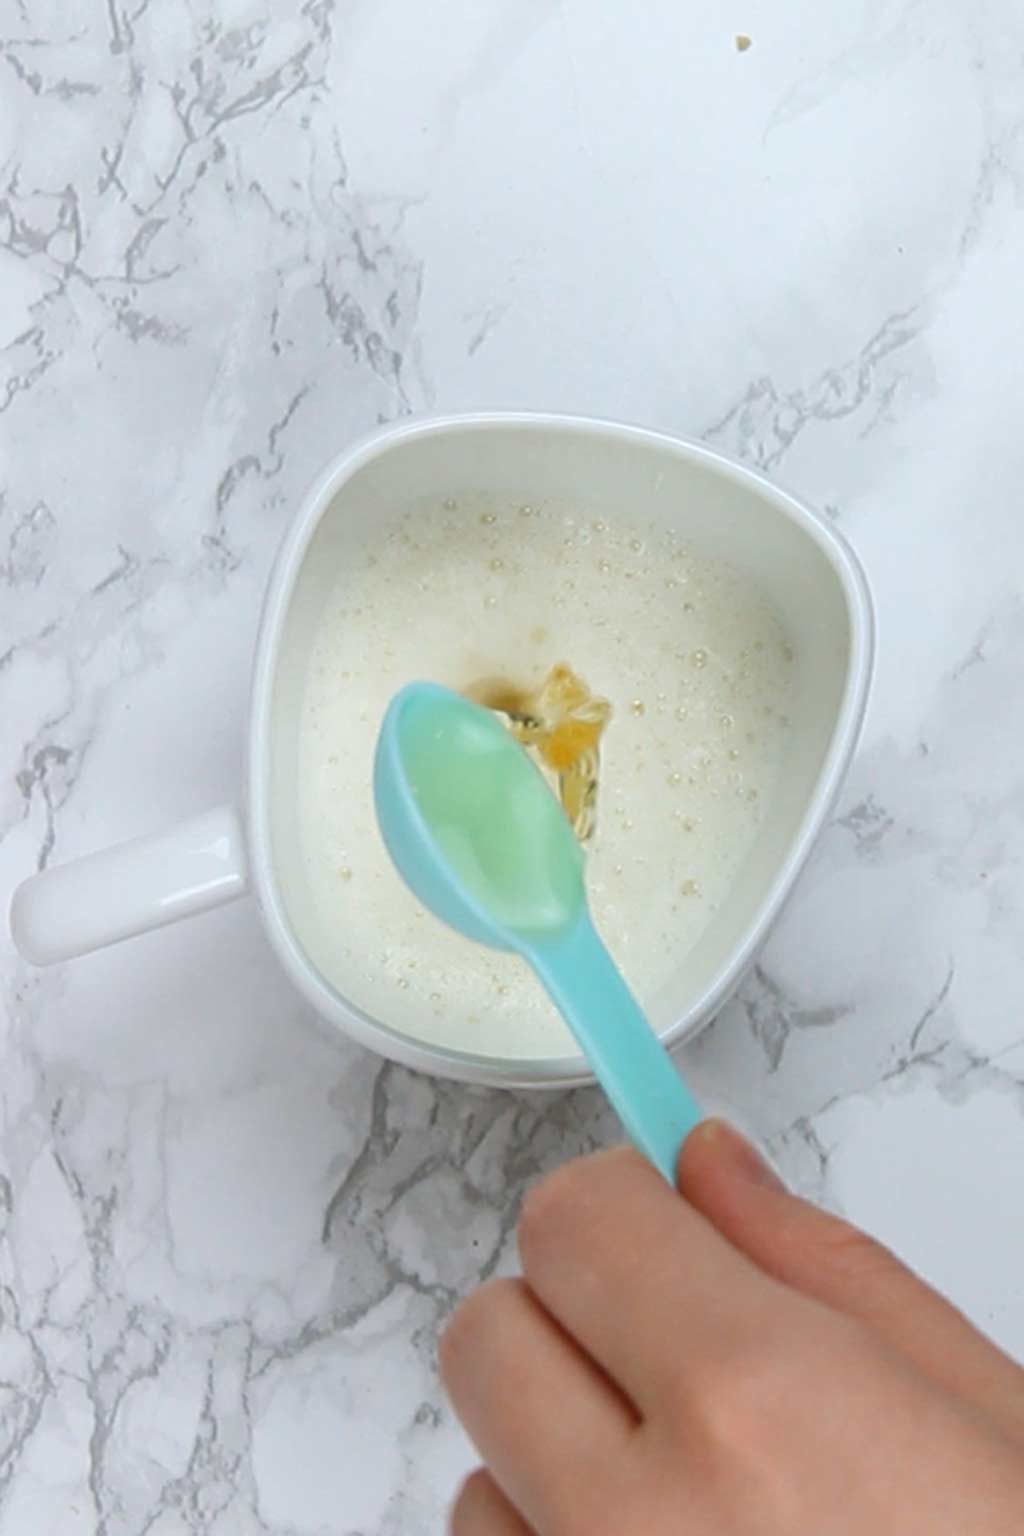 mixing vinegar and soy milk together in a mug